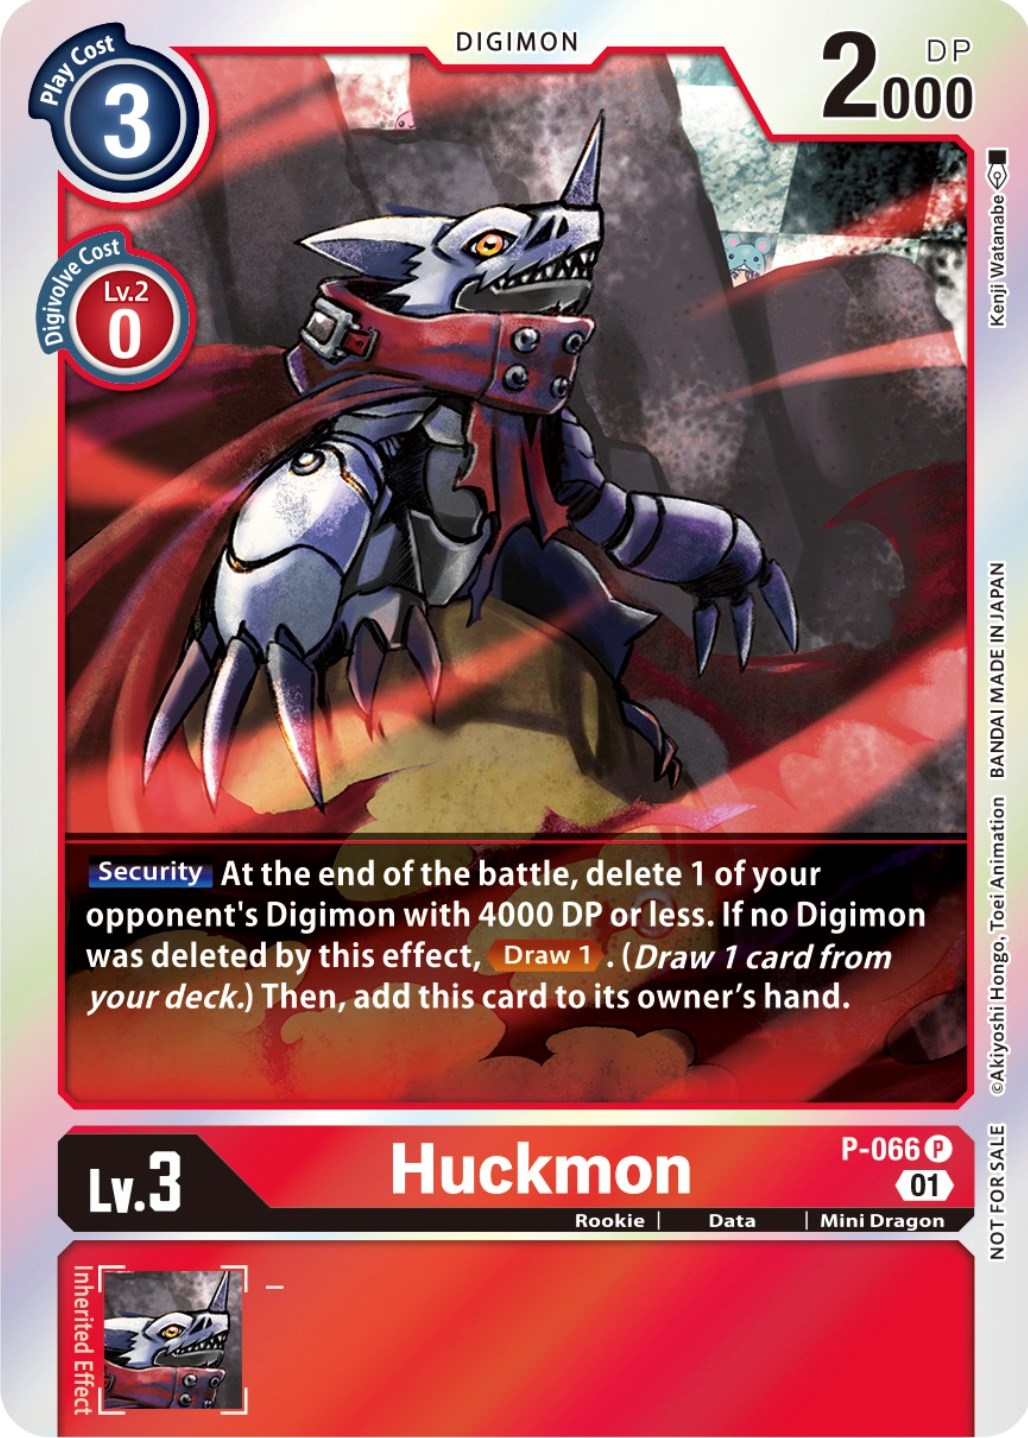 Huckmon [P-066] (Limited Card Pack) [Promotional Cards] | Shuffle n Cut Hobbies & Games